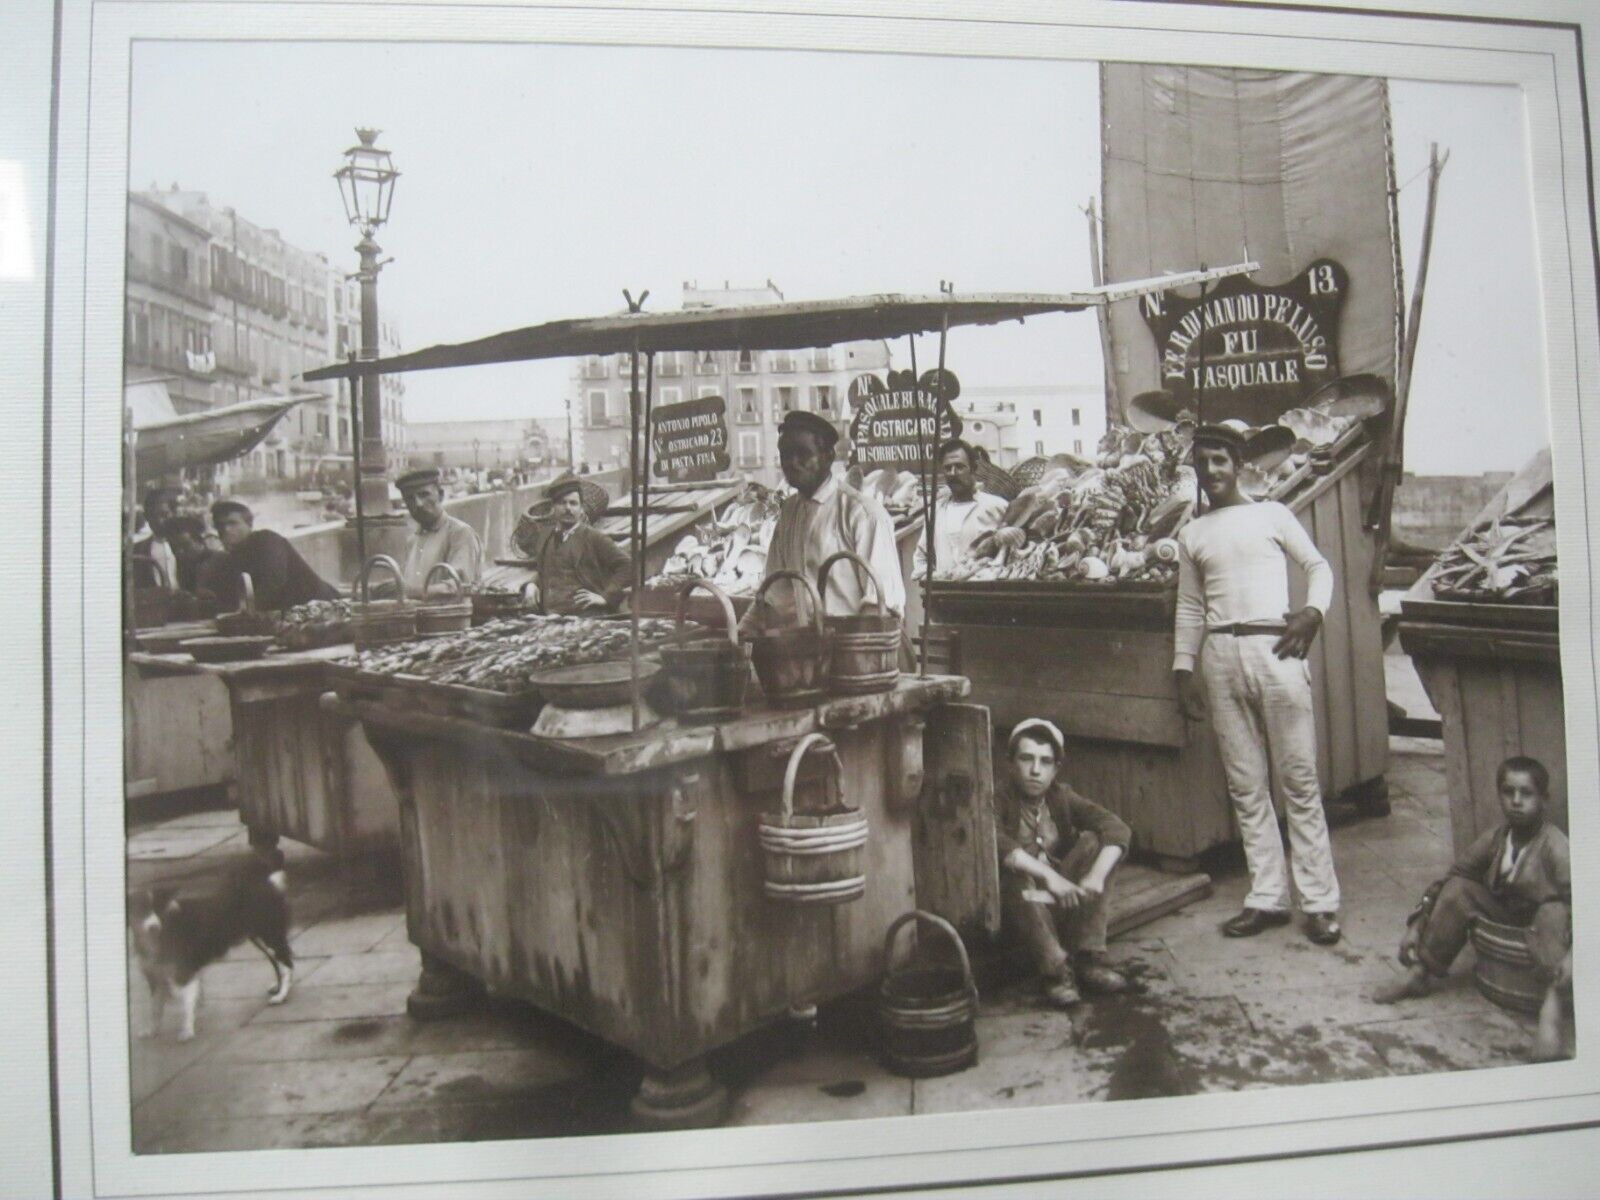 Turn of the Century Seafood Market in Italy Framed Black & White Photo 16x12 \